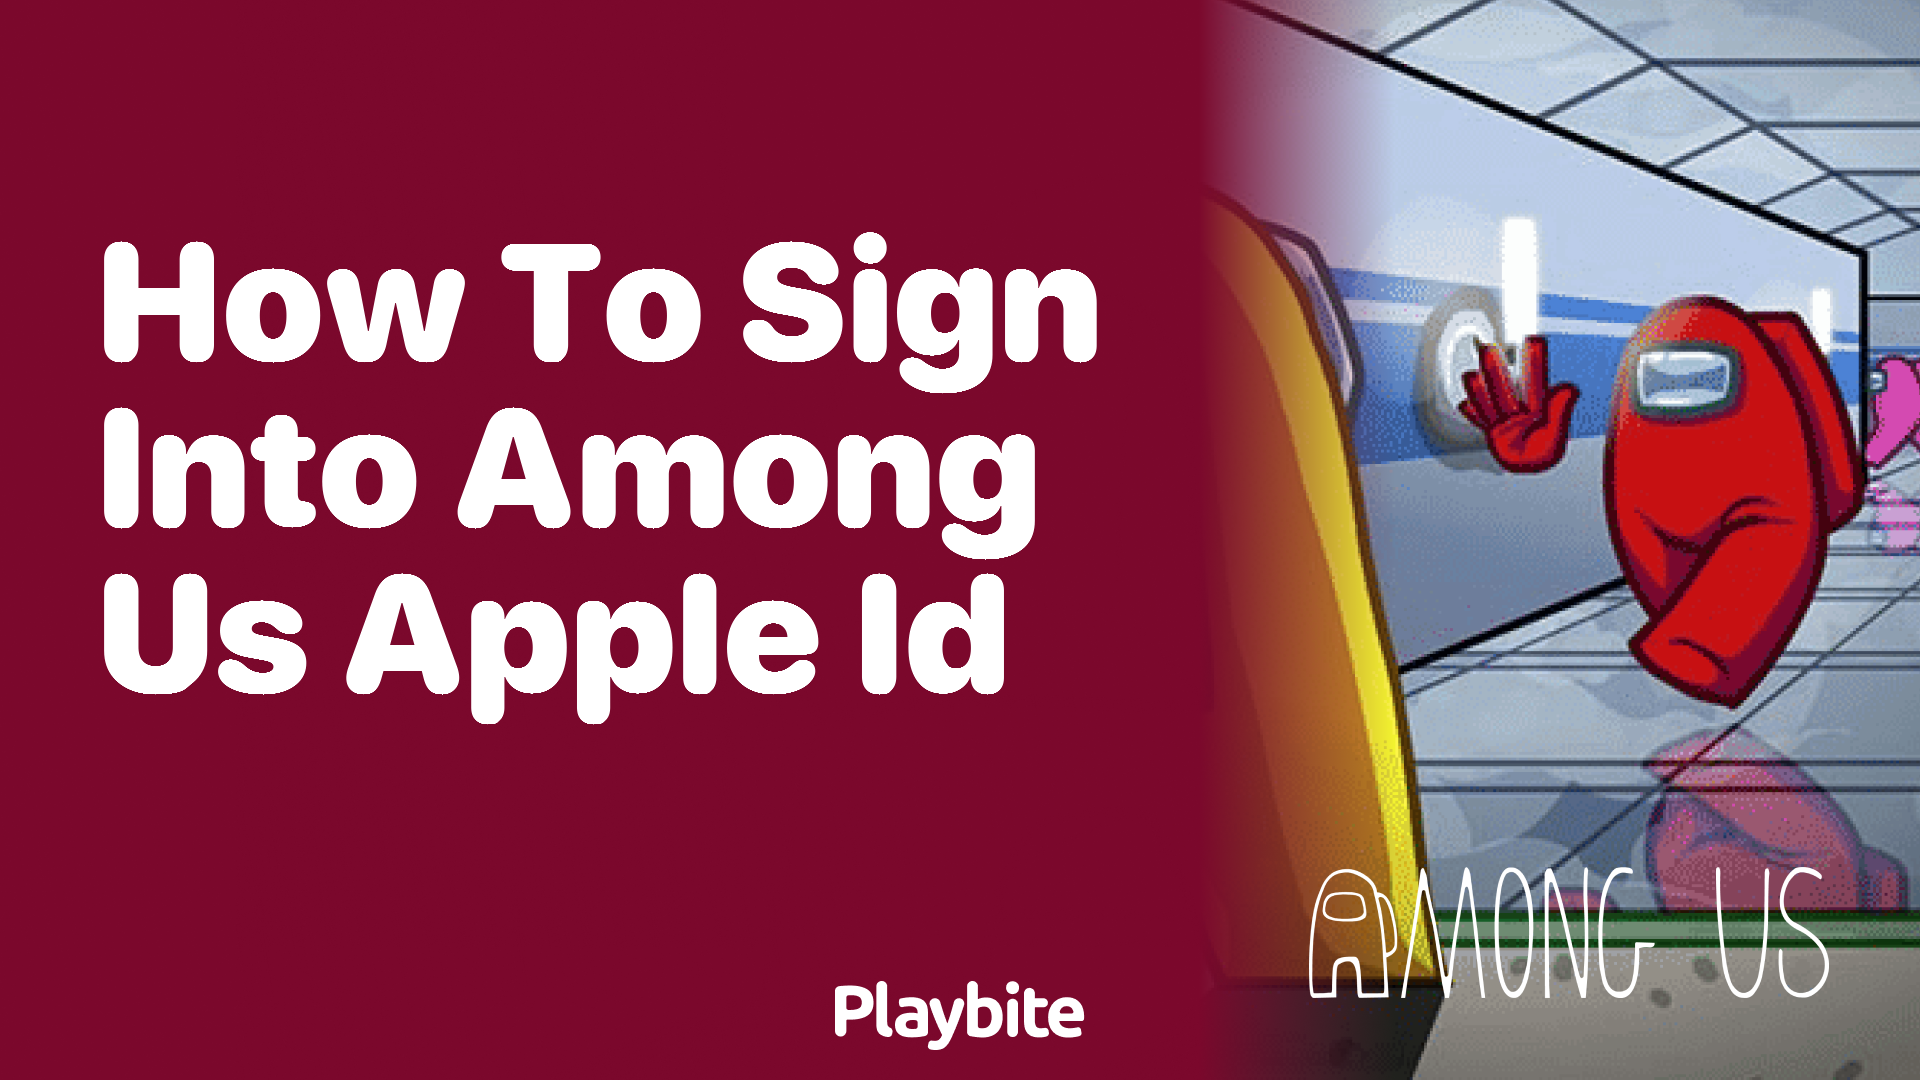 How to Sign Into Among Us with an Apple ID